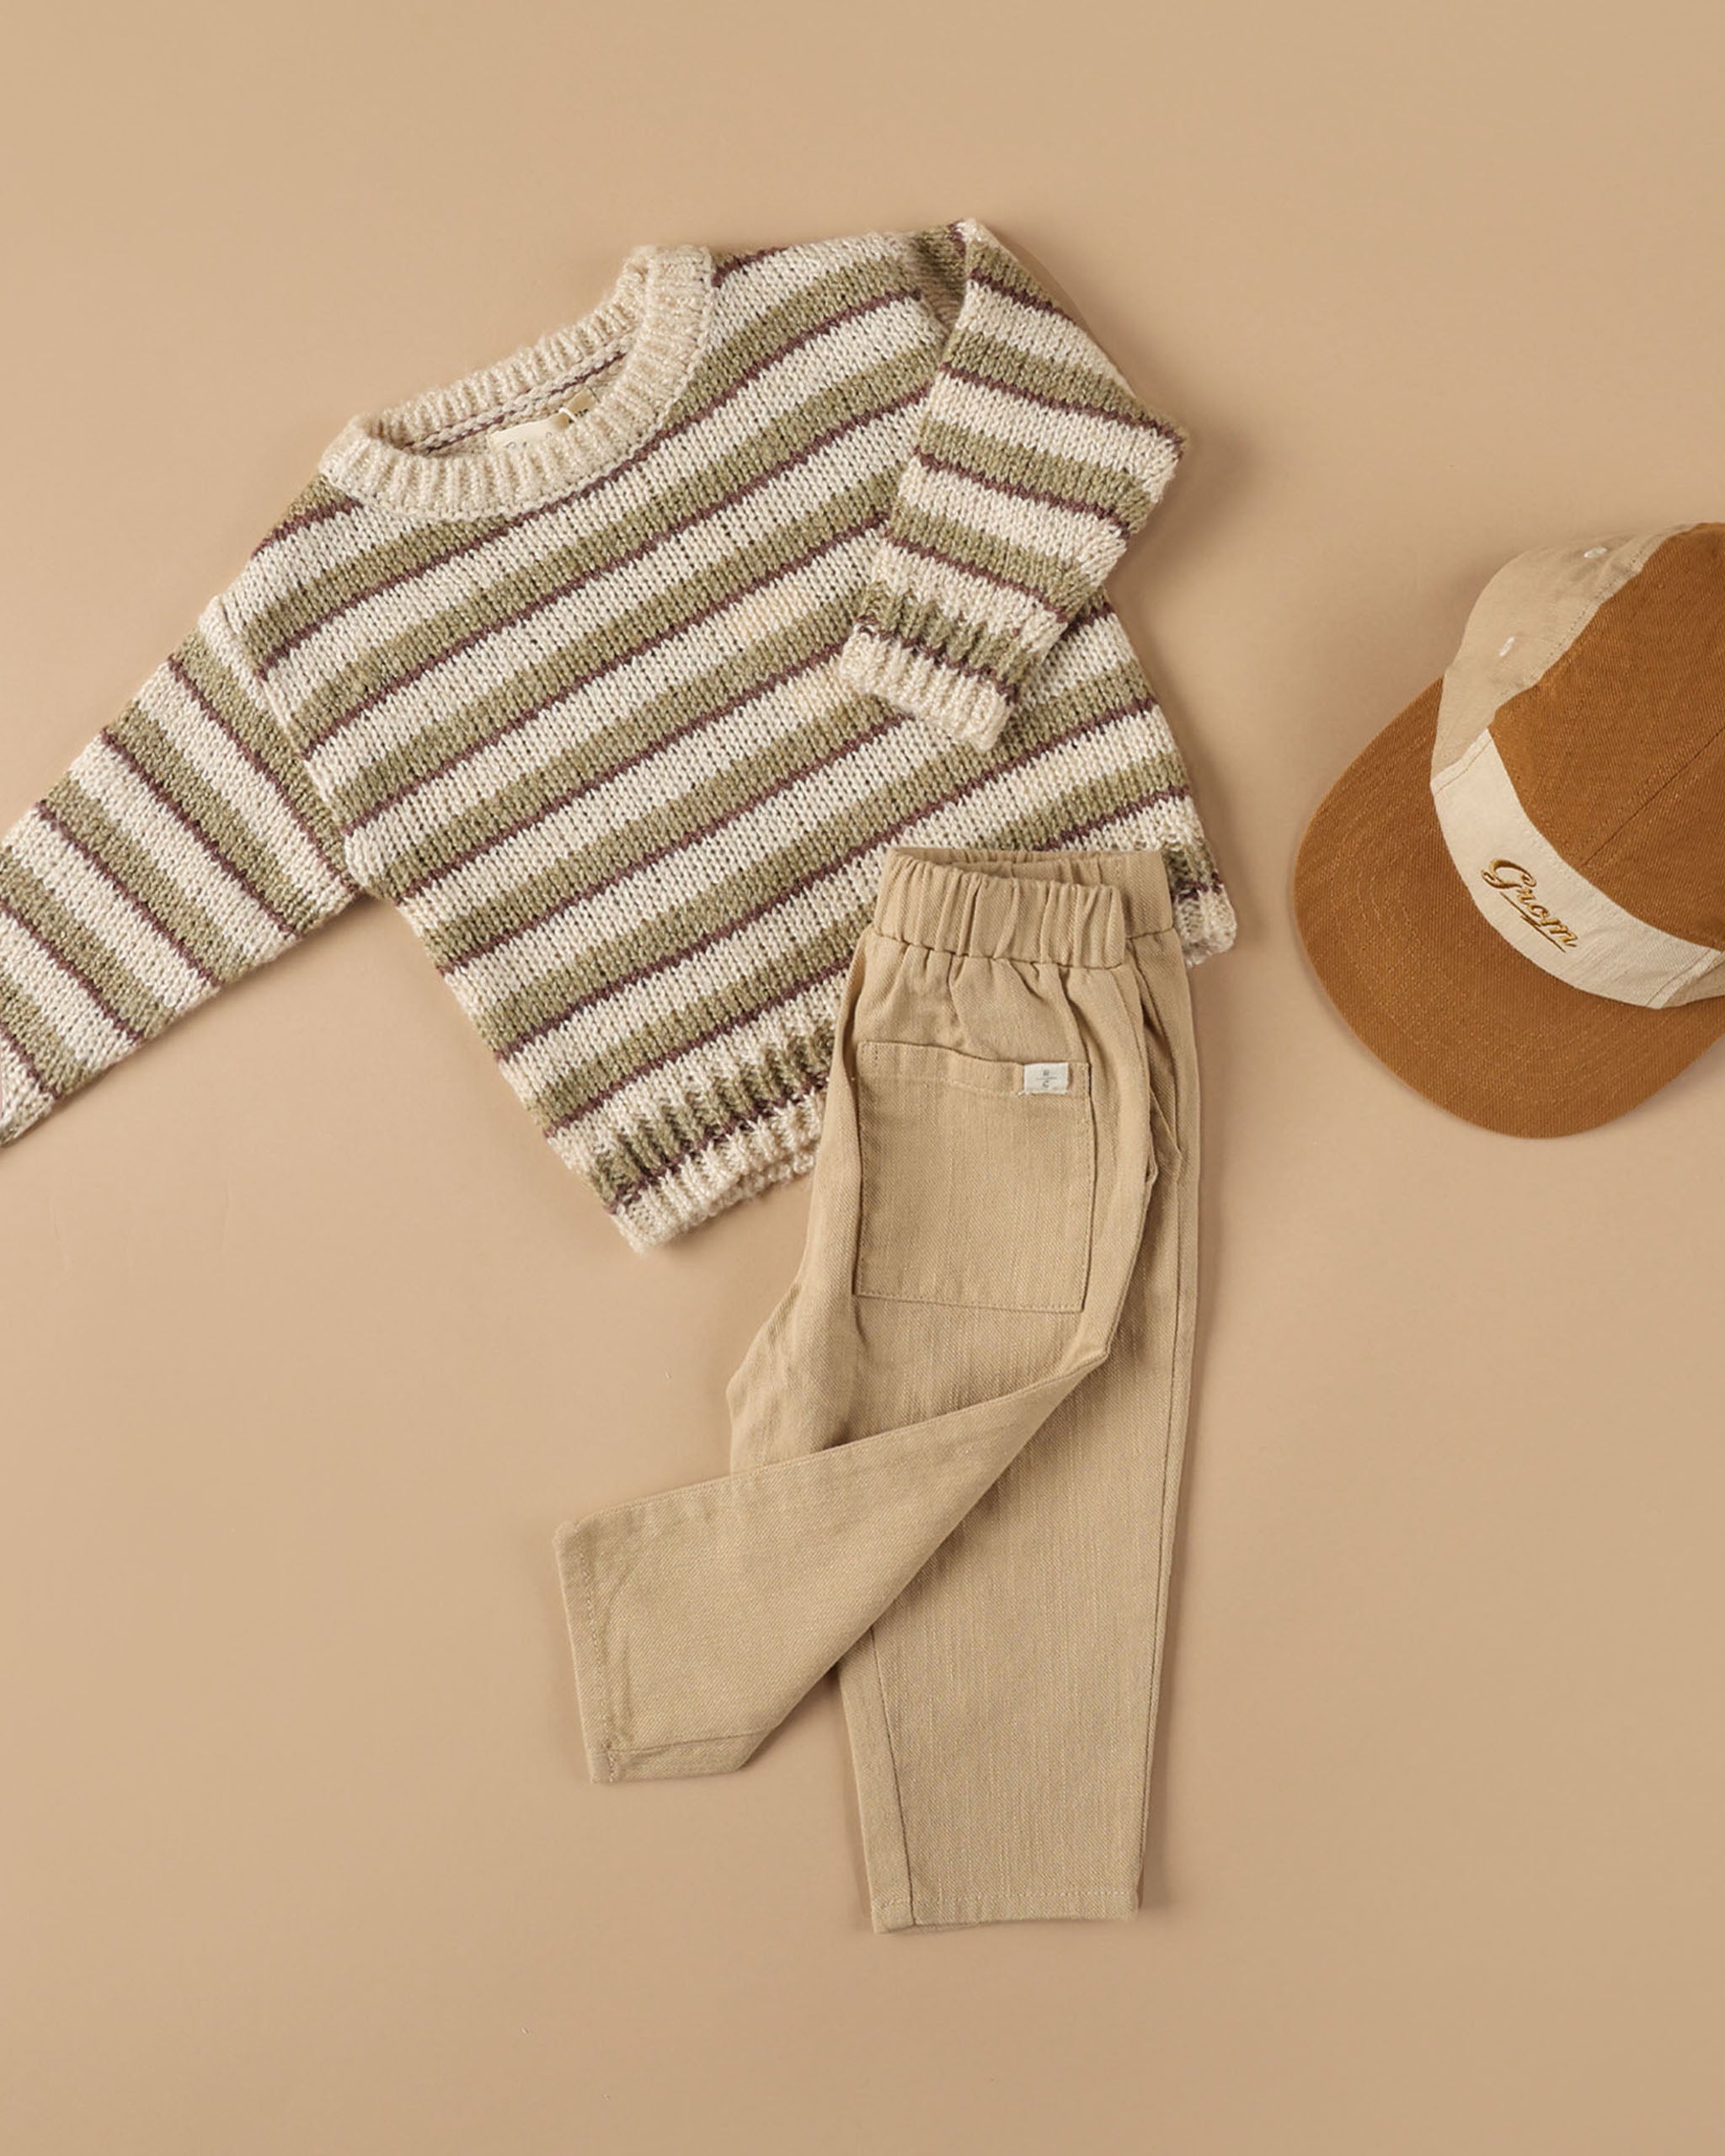 Aspen Sweater || Fall Stripe - Rylee + Cru | Kids Clothes | Trendy Baby Clothes | Modern Infant Outfits |